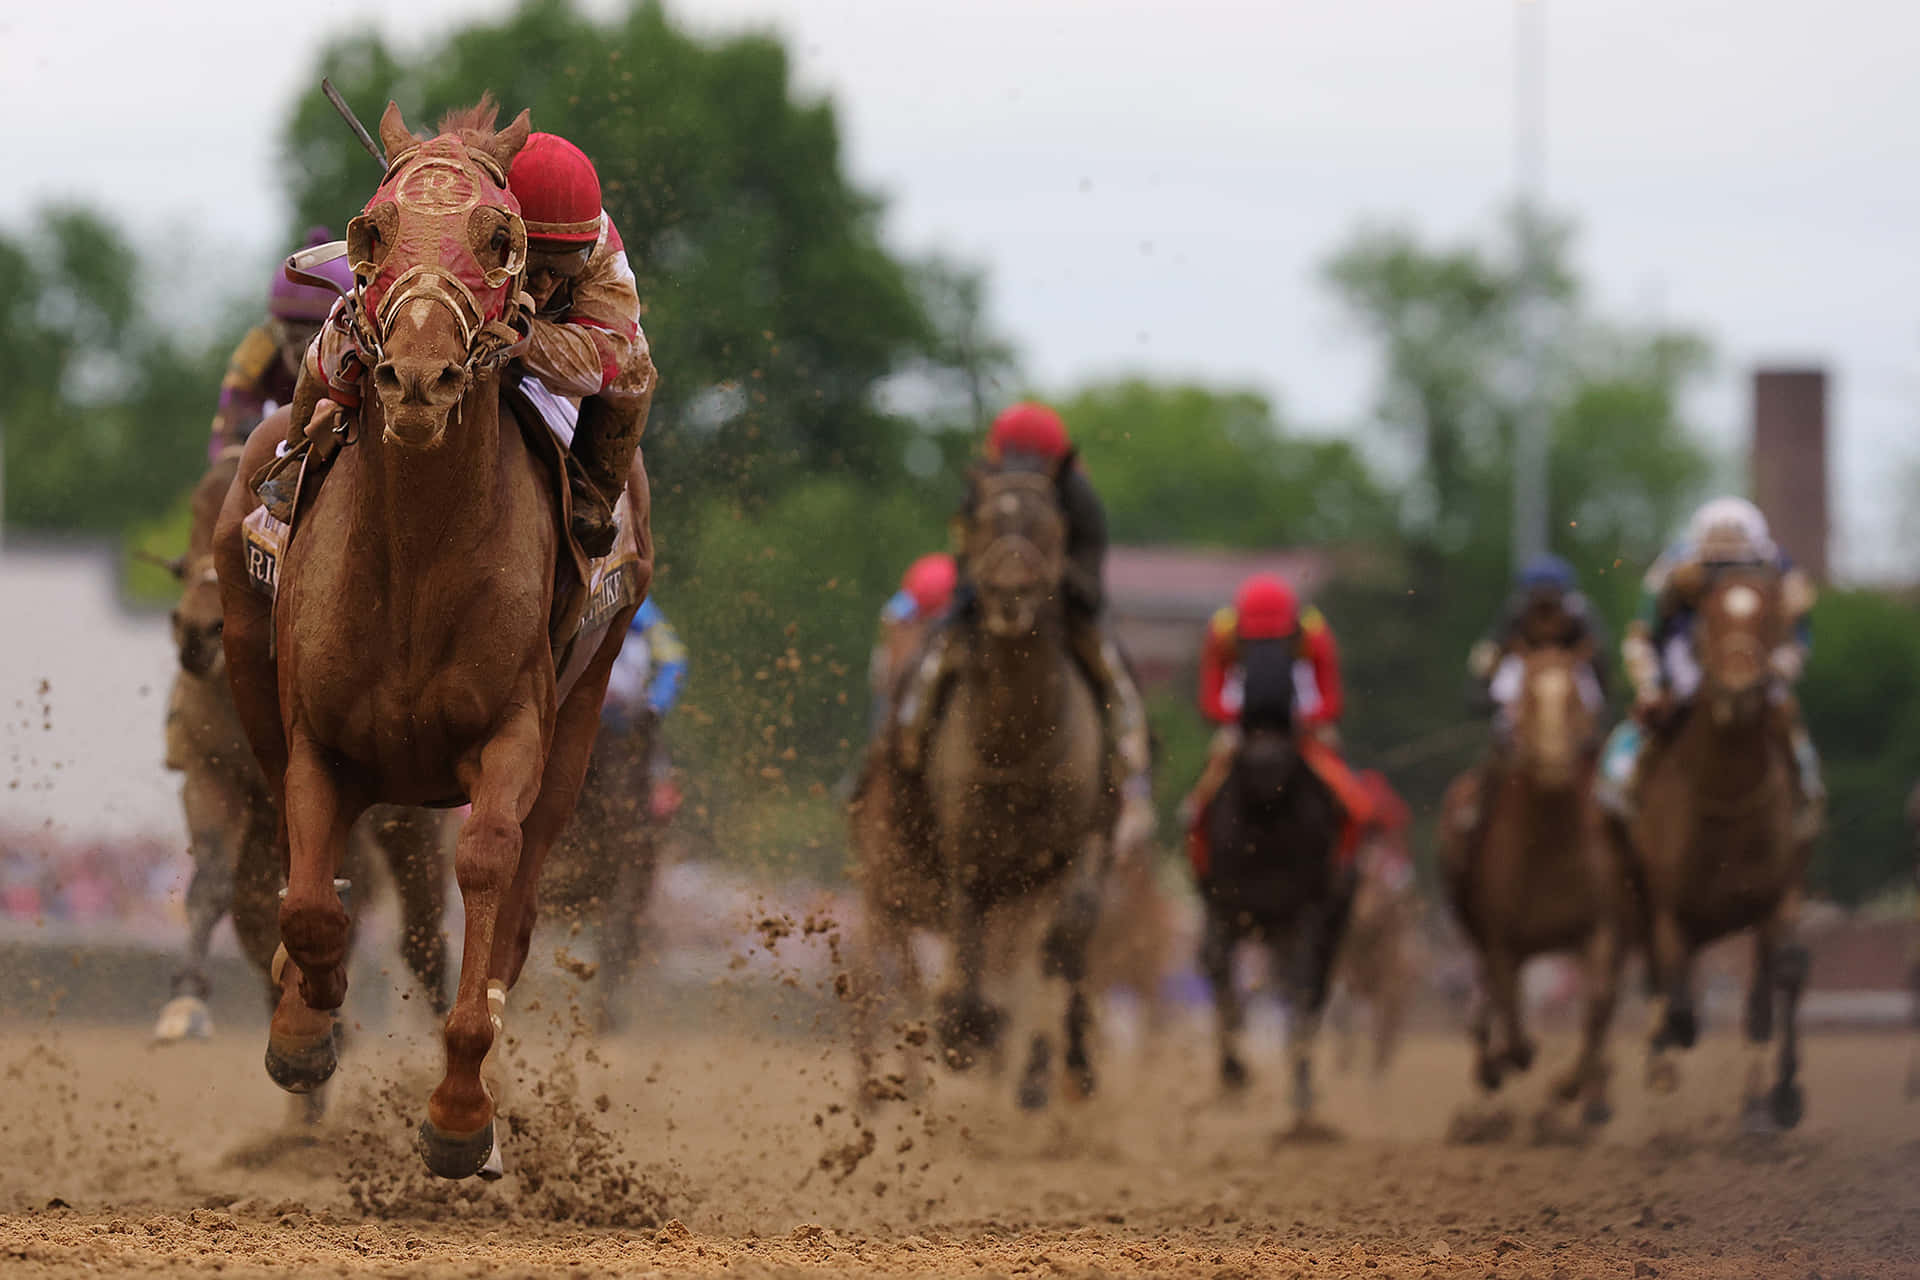 A Group Of Jockeys Are Racing Horses On A Dirt Track